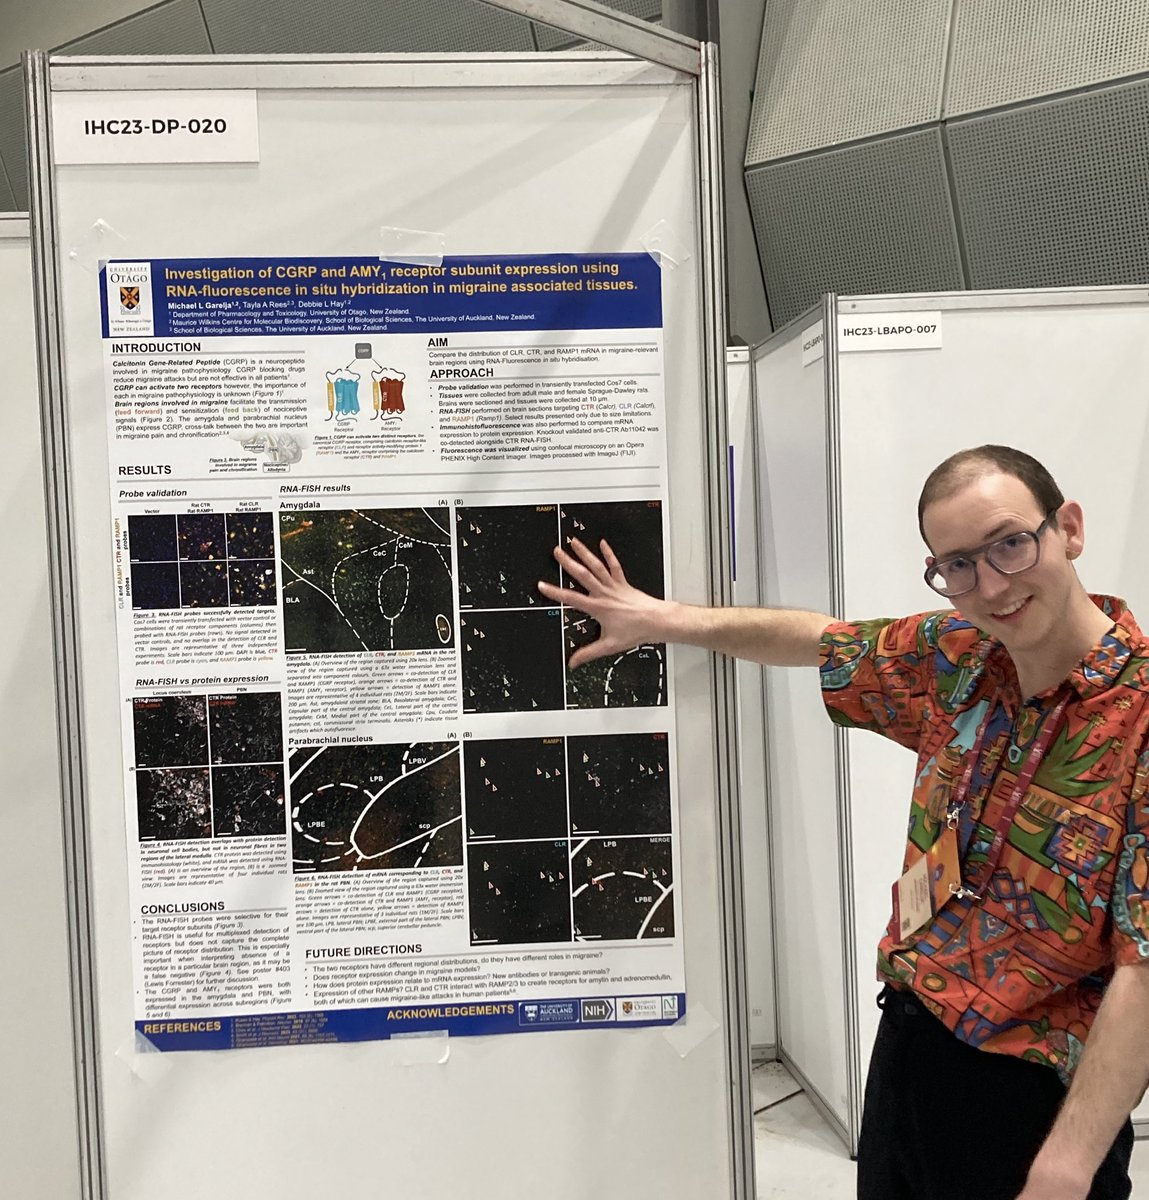 Come to my poster (DP-020) at #IHC2023! CGRP-responsive receptors in migraine relevant zones, and RNA vs Protein expression 🤜💥🤛. I have nice pictures, love GPCRs, and have many hand gestures. So many thanks to @NeurologicalNZ for helping me get here!